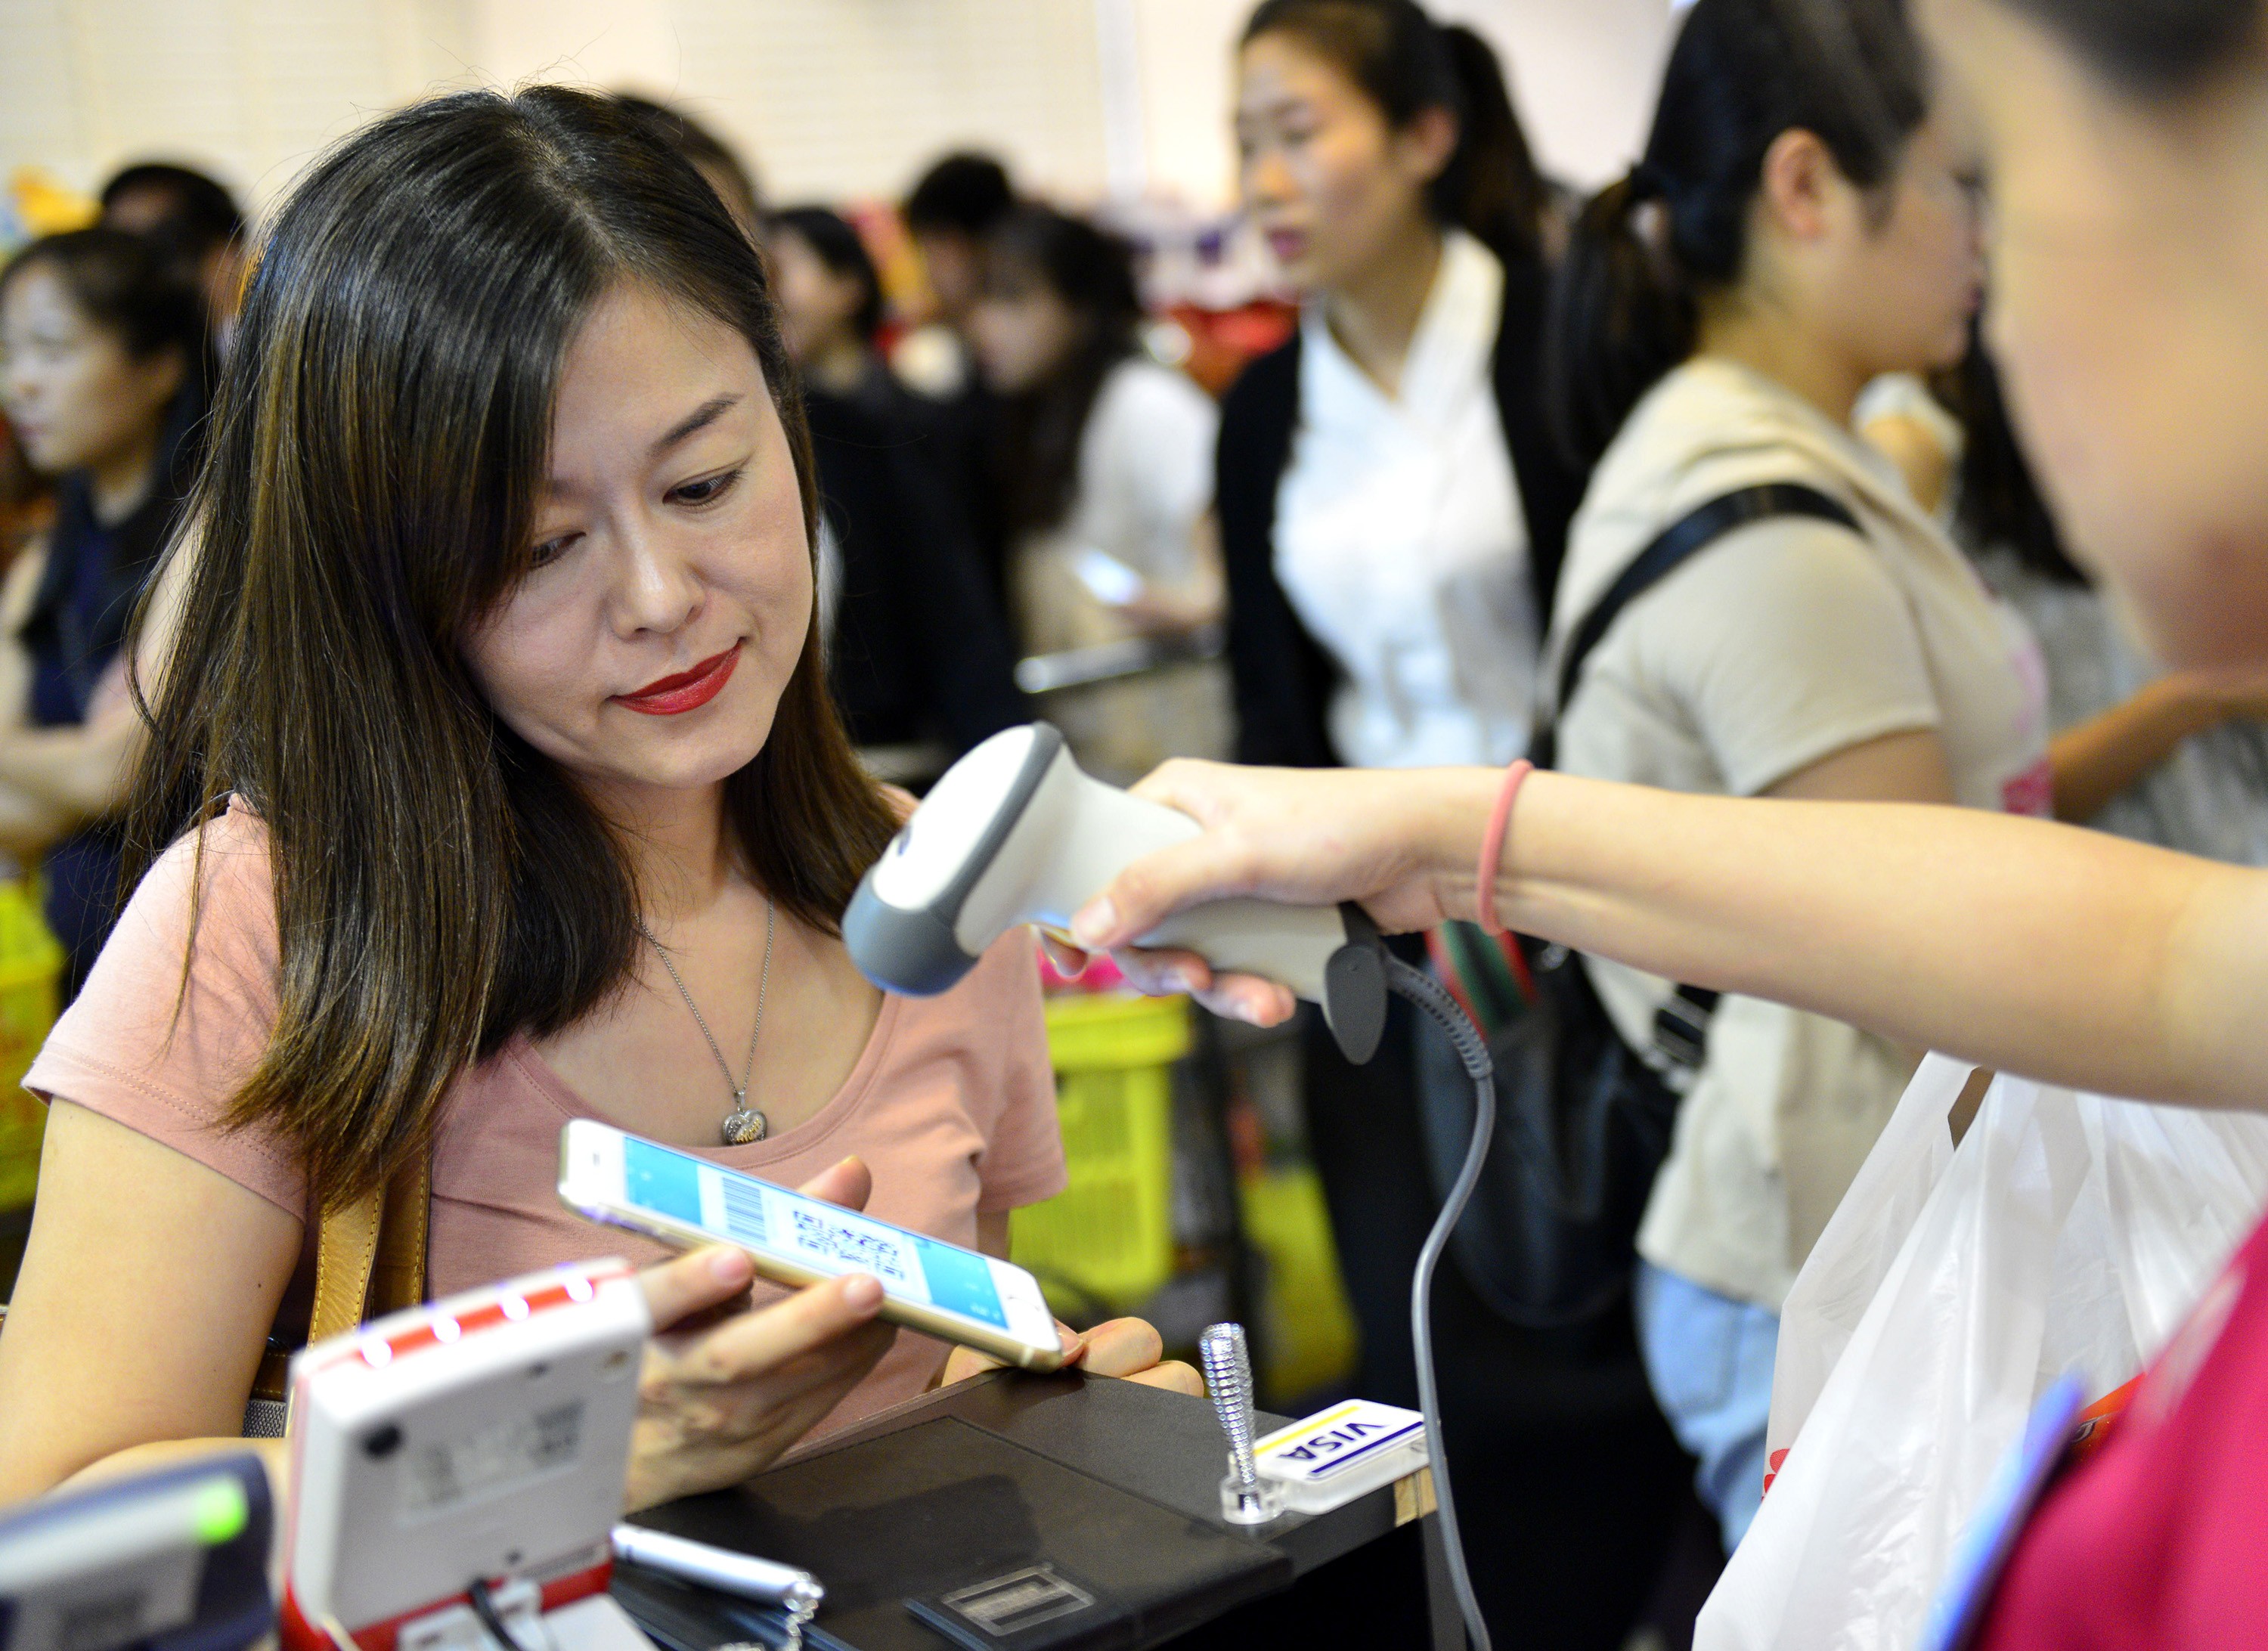 E-payments are popular in Sweden, the Netherlands and China. Photo: Xinhua